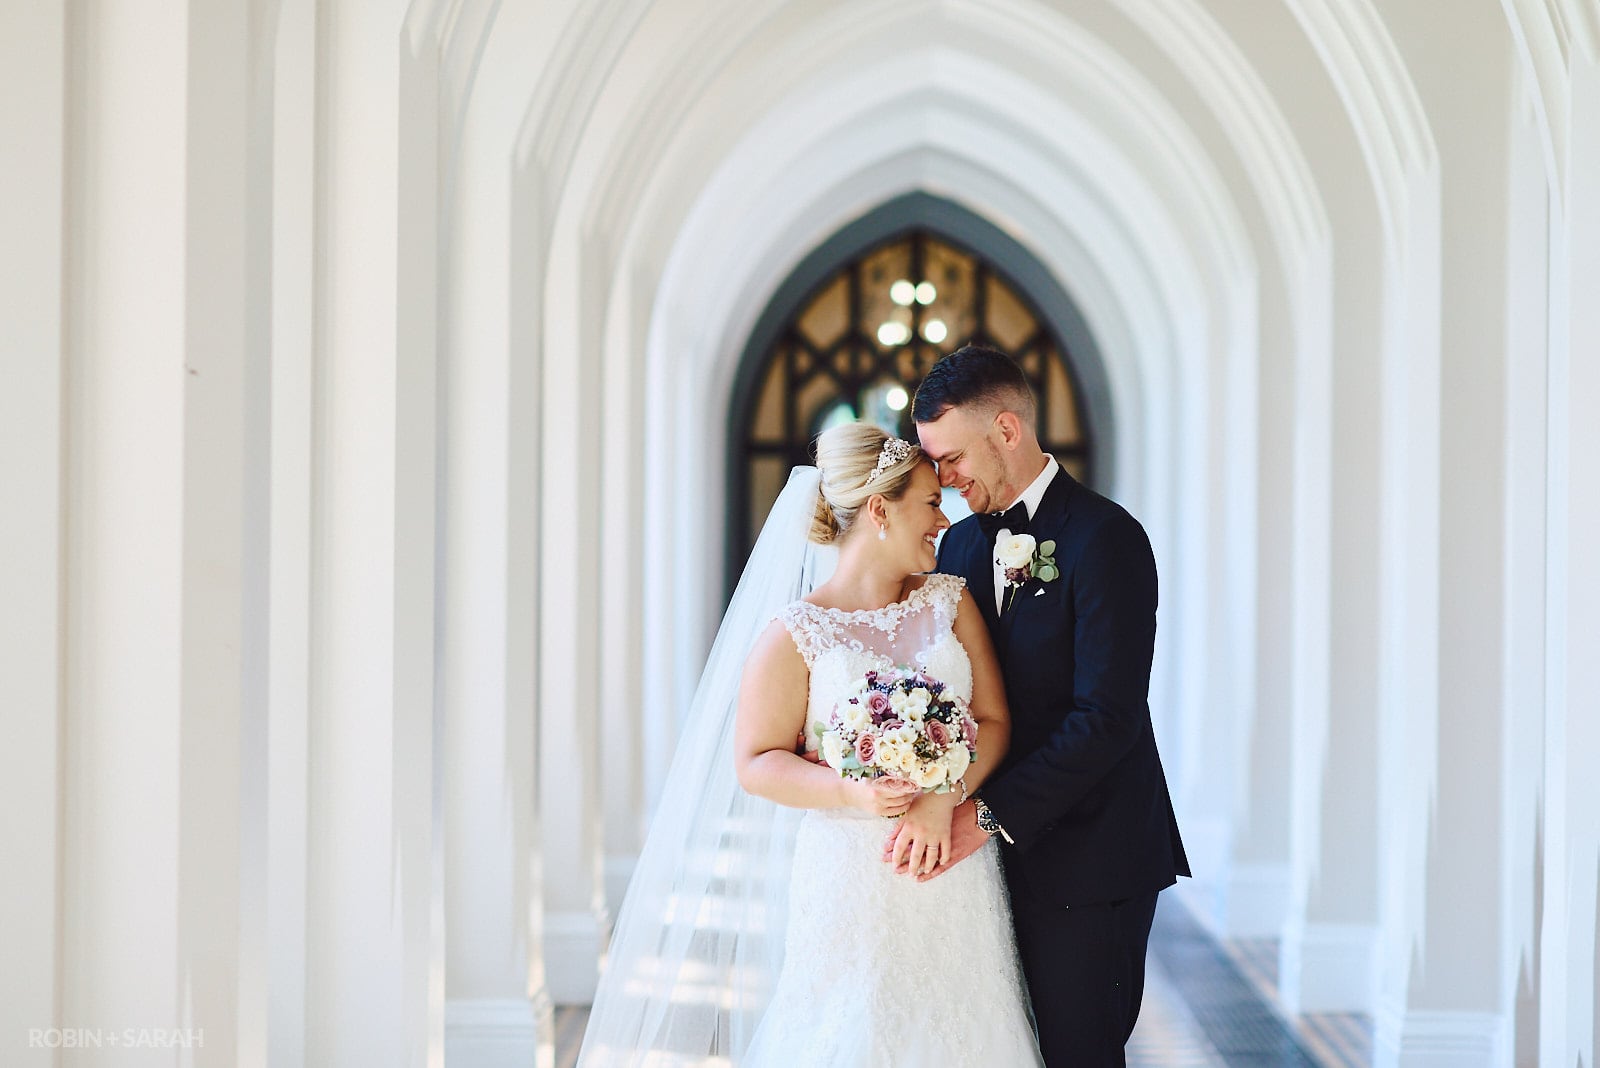 Bride and groom in arched cloisters at Stanbrook Abbey